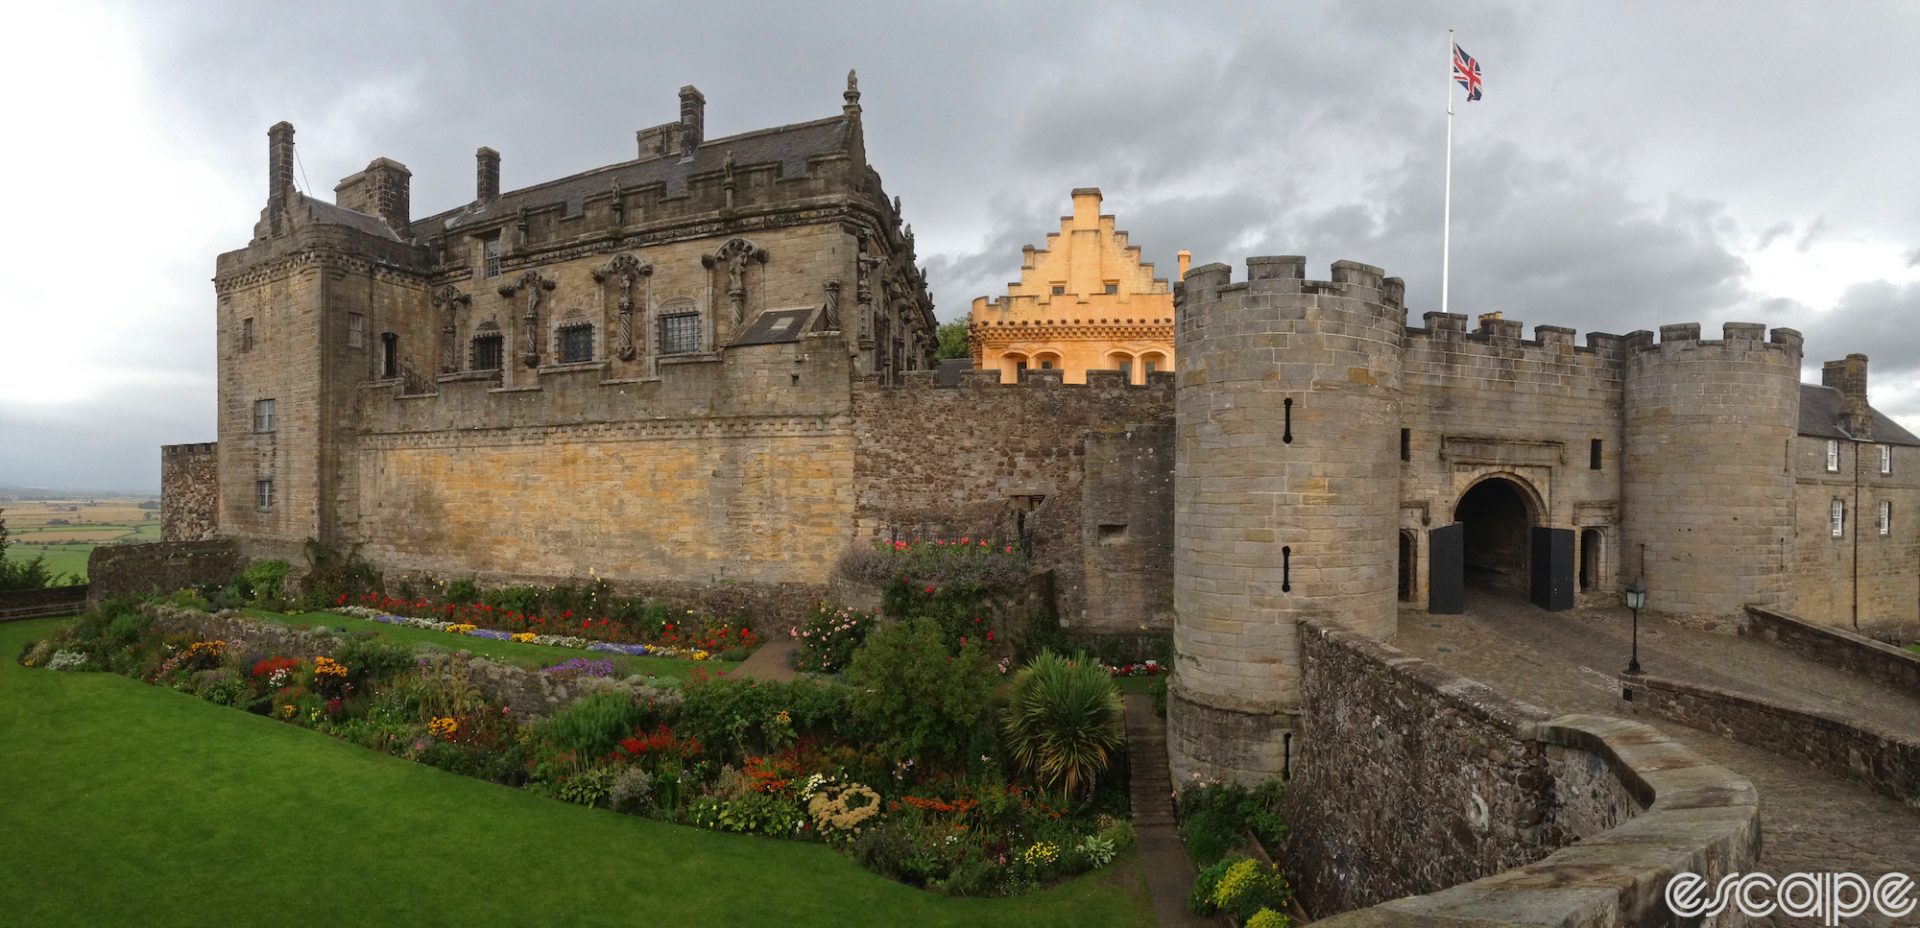 A panoramic shot of Stirling Castle in soft light, showing the castle proper and a large entrance gate with round guard towers.